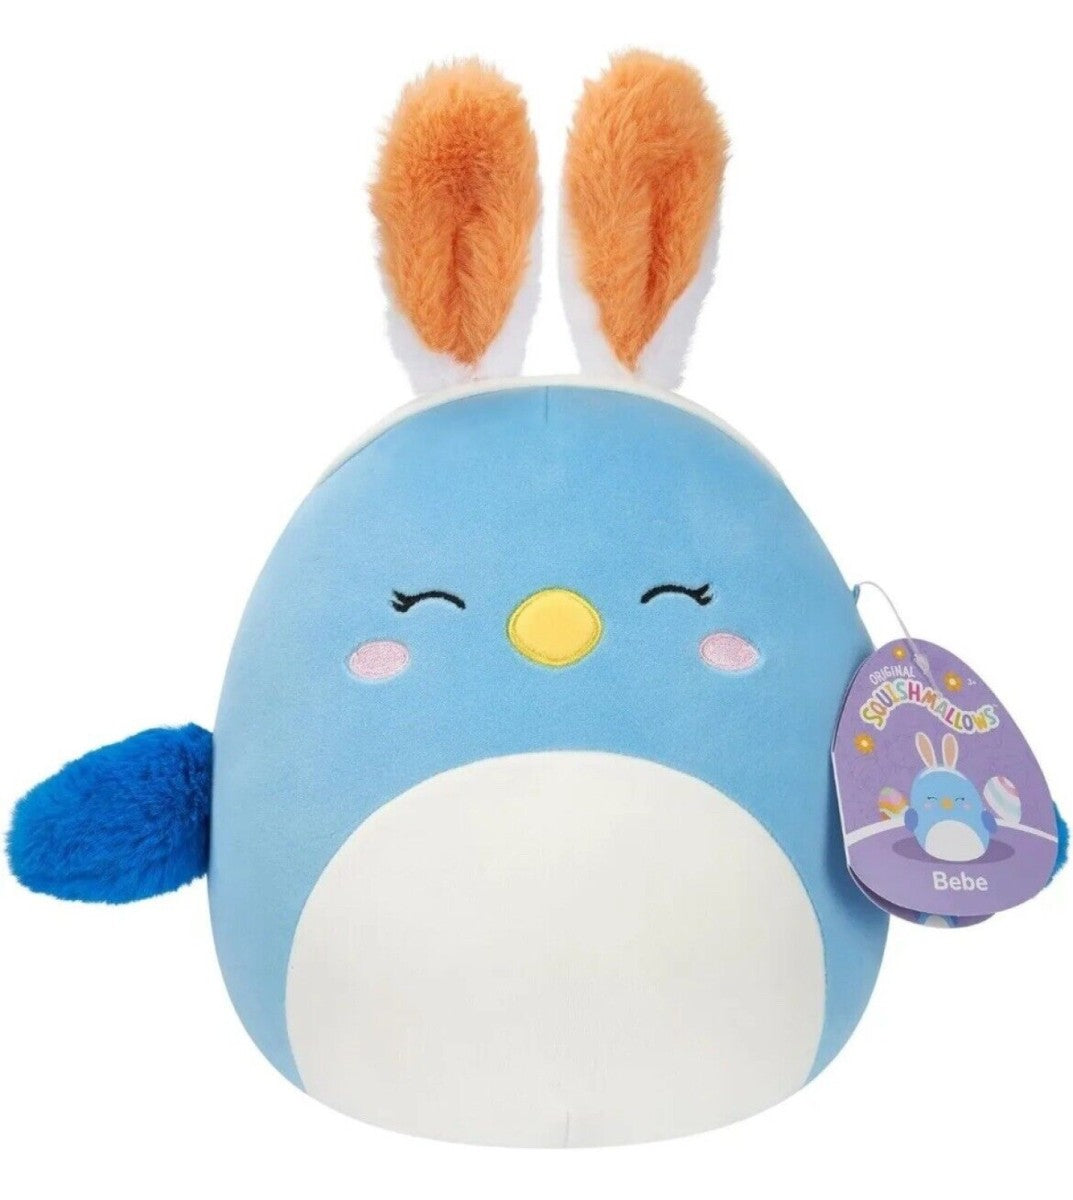 Squishmallows 7.5" Easter Plush Toy - Bebe